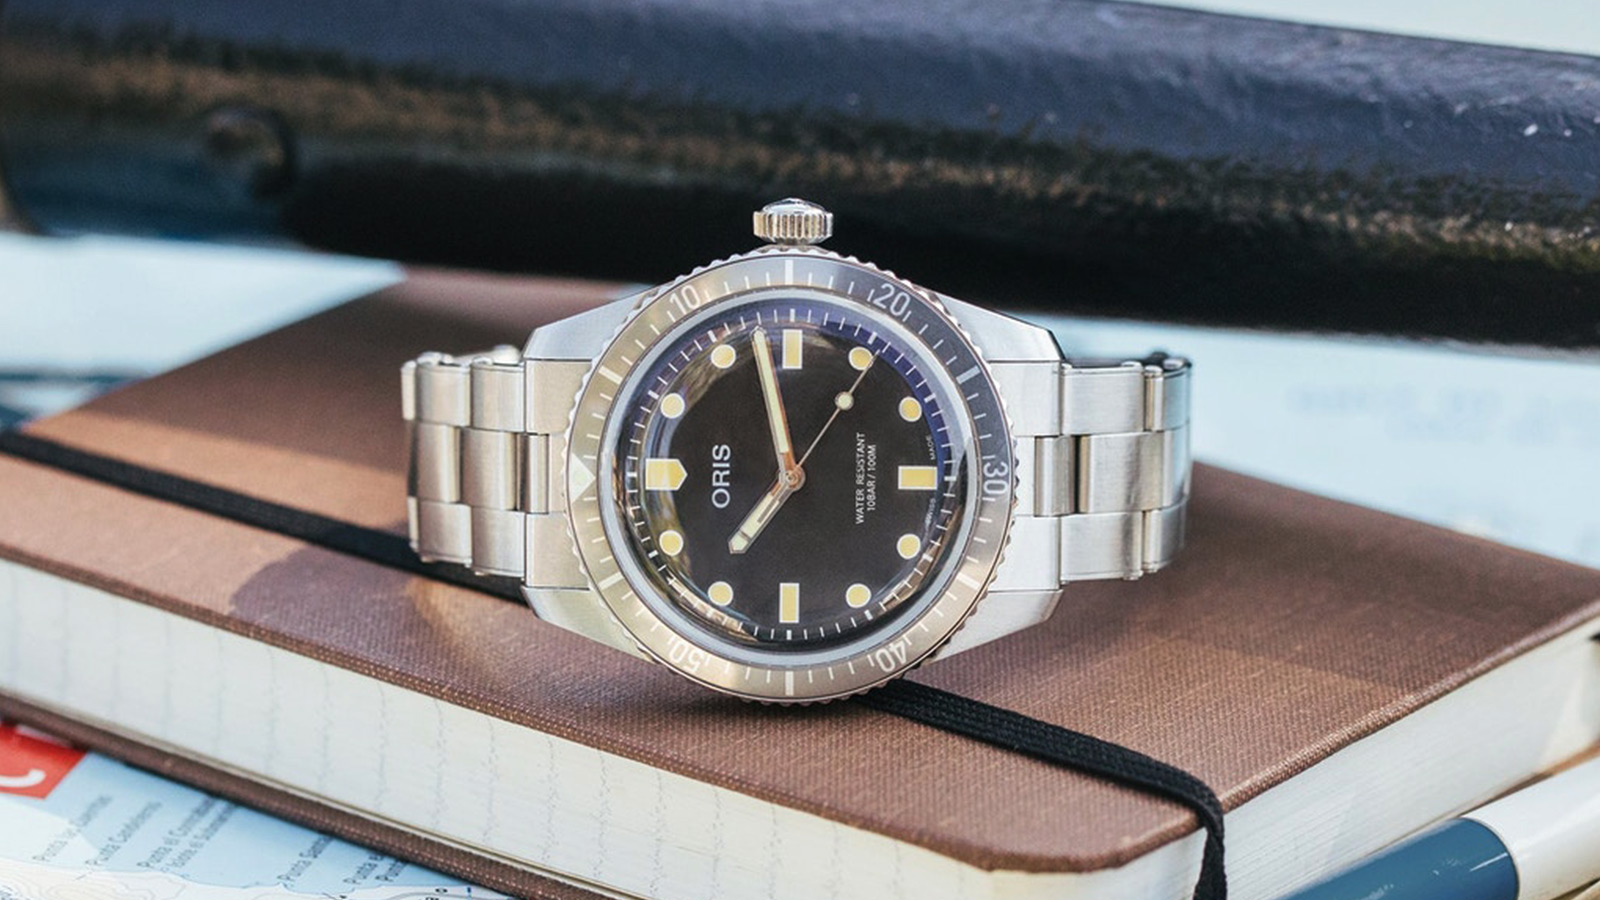 Oris Divers Sixty-Five Hodinkee Limited Edition